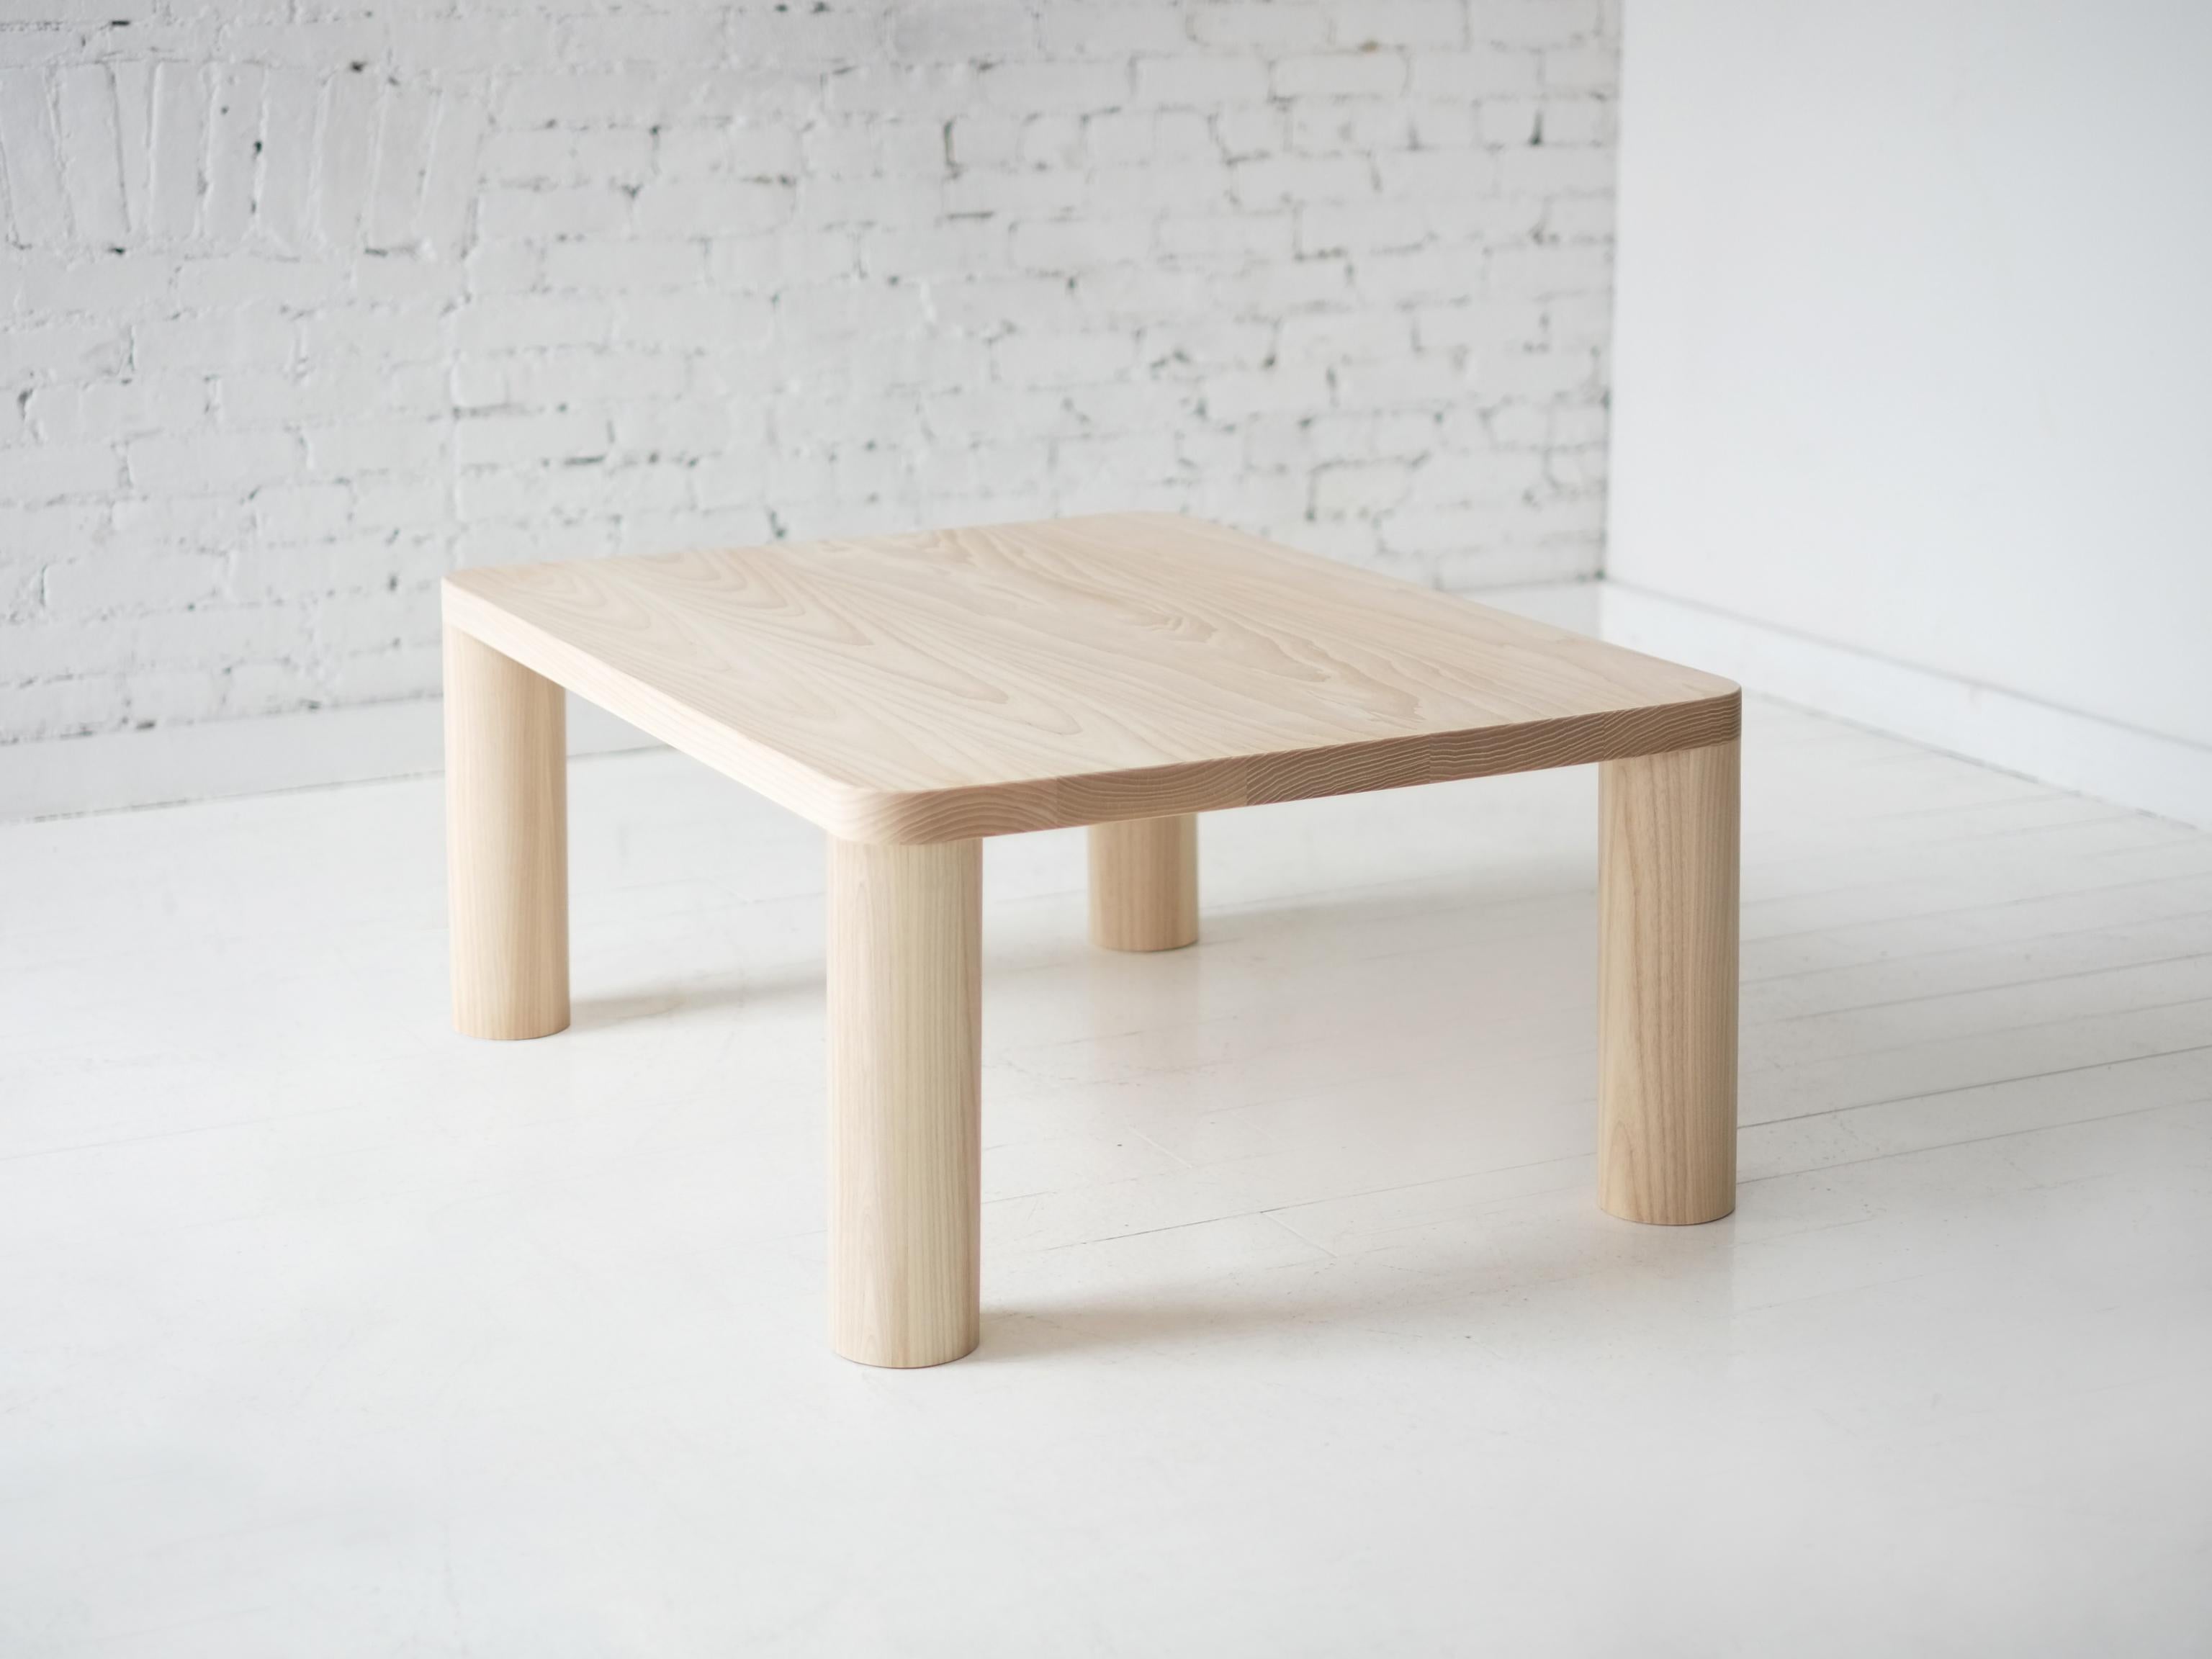 This contemporary, minimal wooden coffee table features four large round legs that seamlessly meet and define the radii of the top, a quiet but powerful detail. 

Made to order in custom sizes, shapes, materials and finishes. Ash version pictured